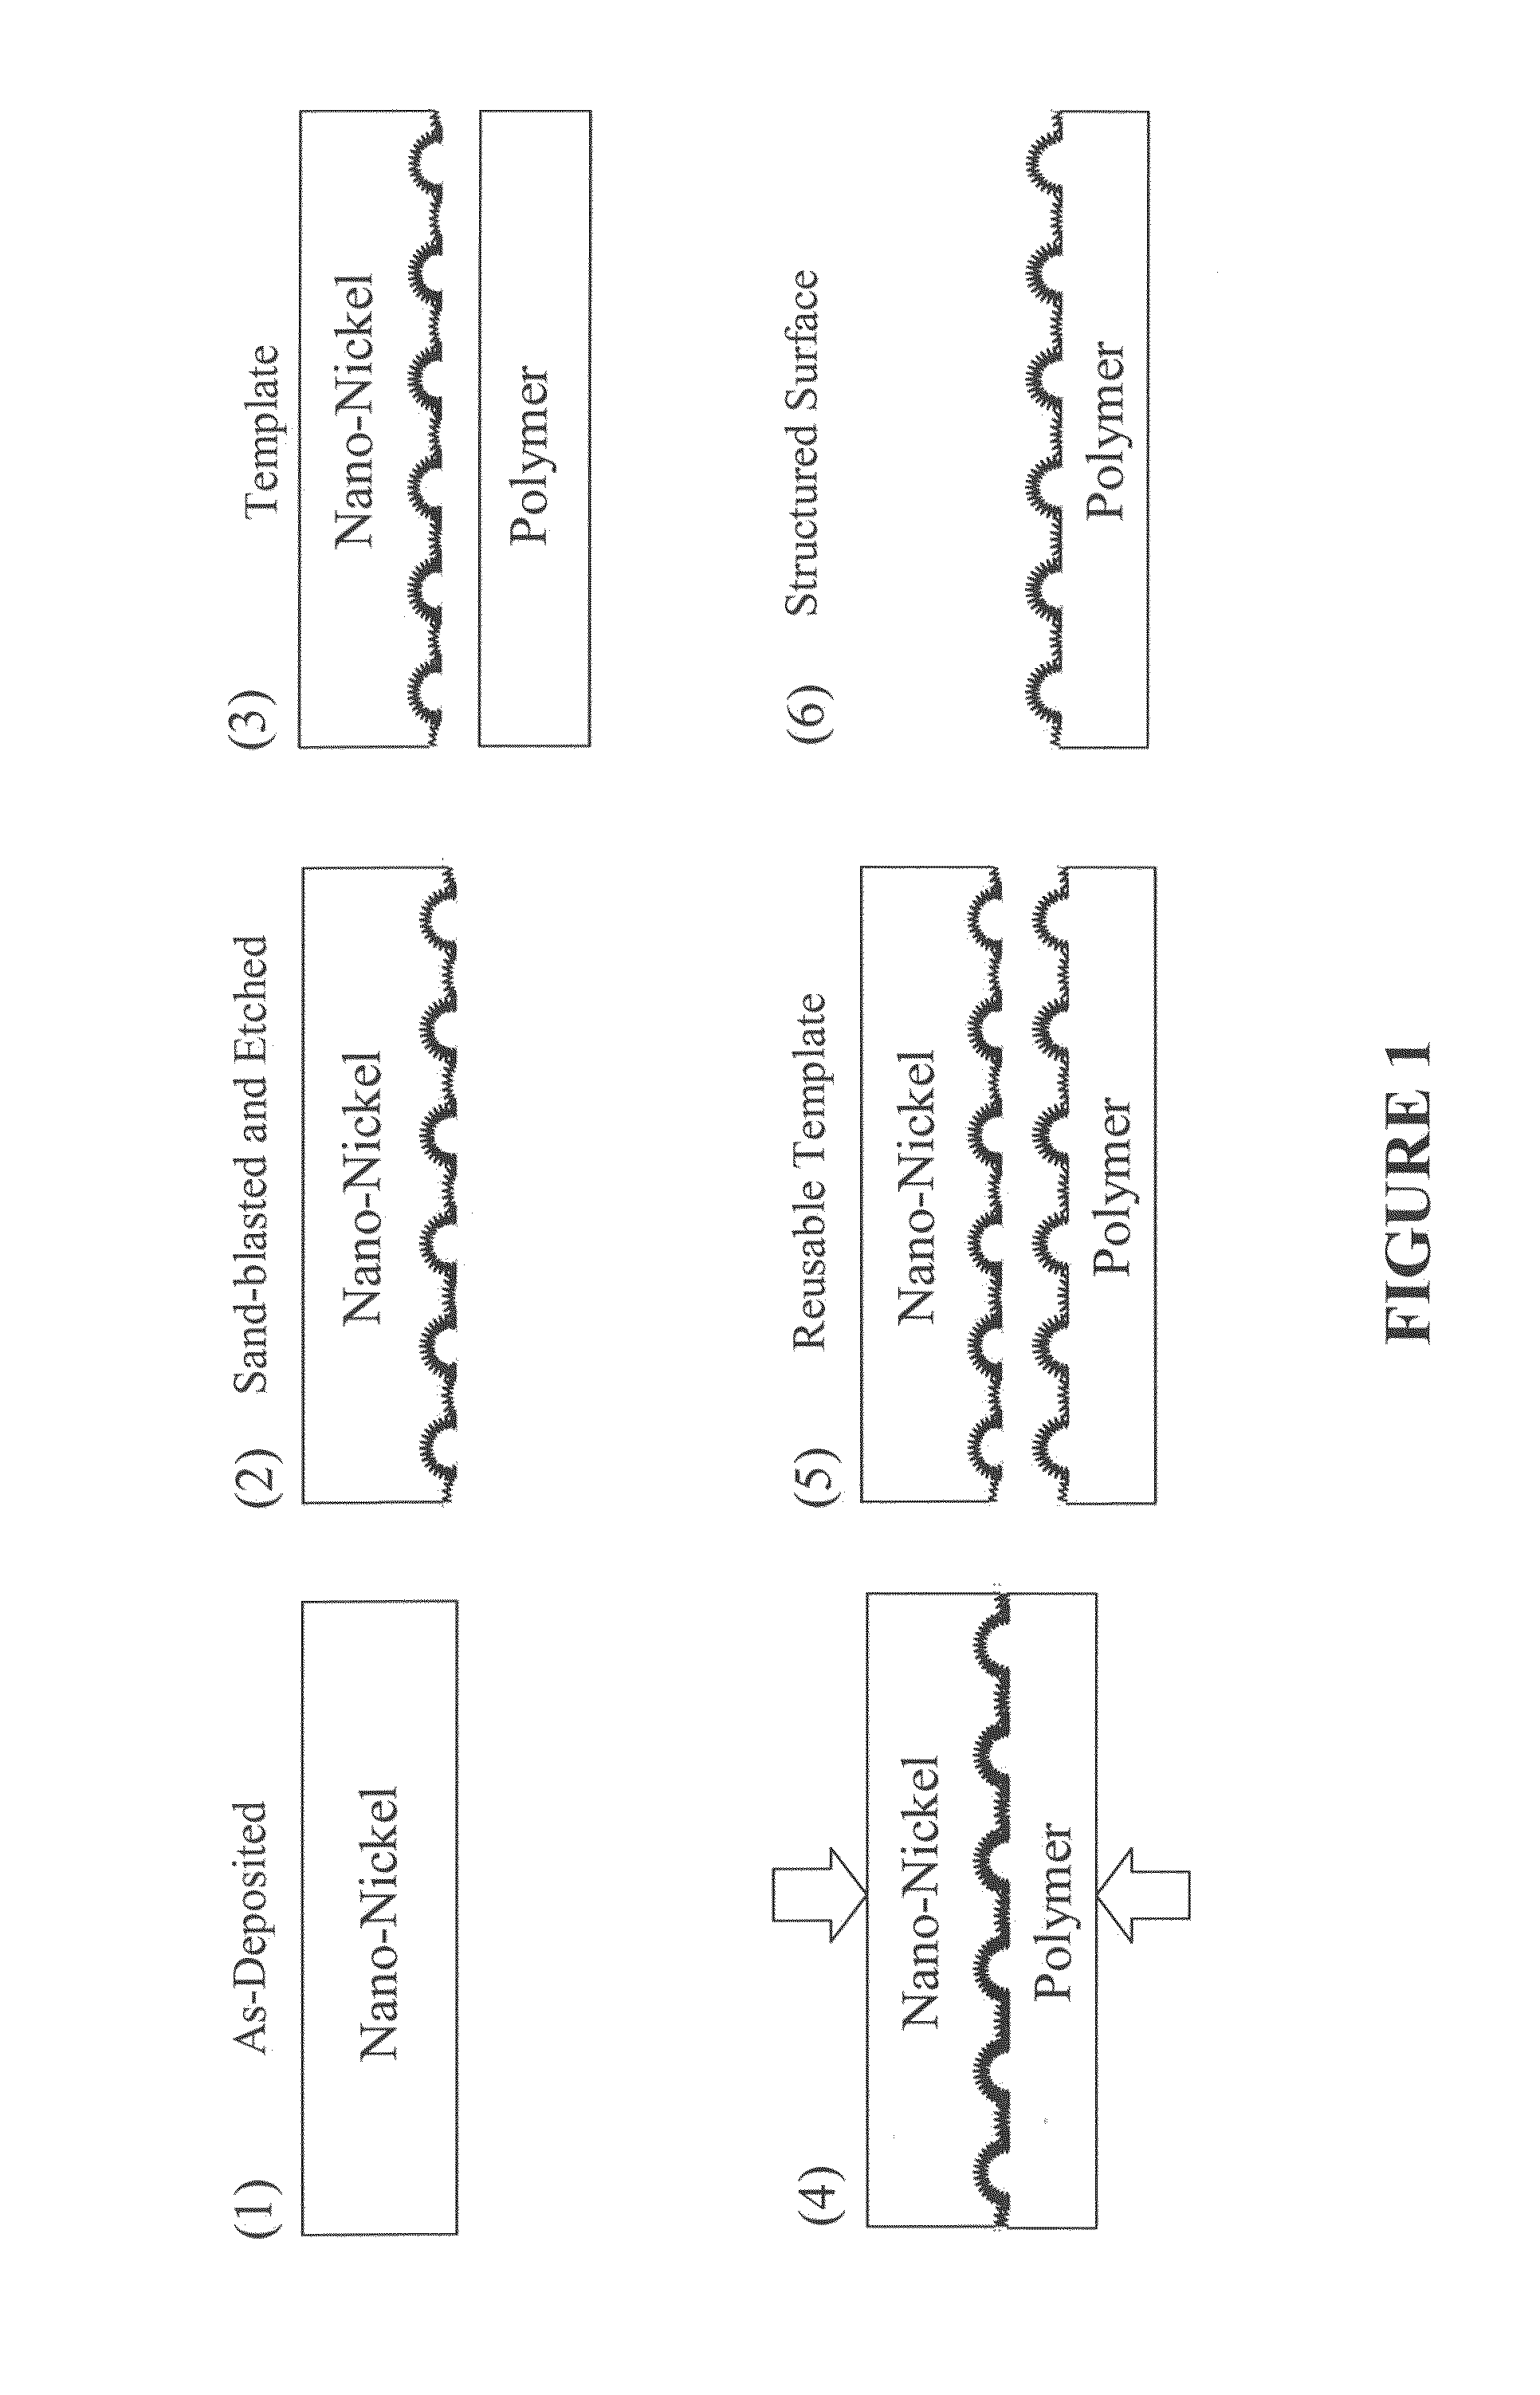 Articles with super-hydrophobic and/or self-cleaning surfaces and method of making same